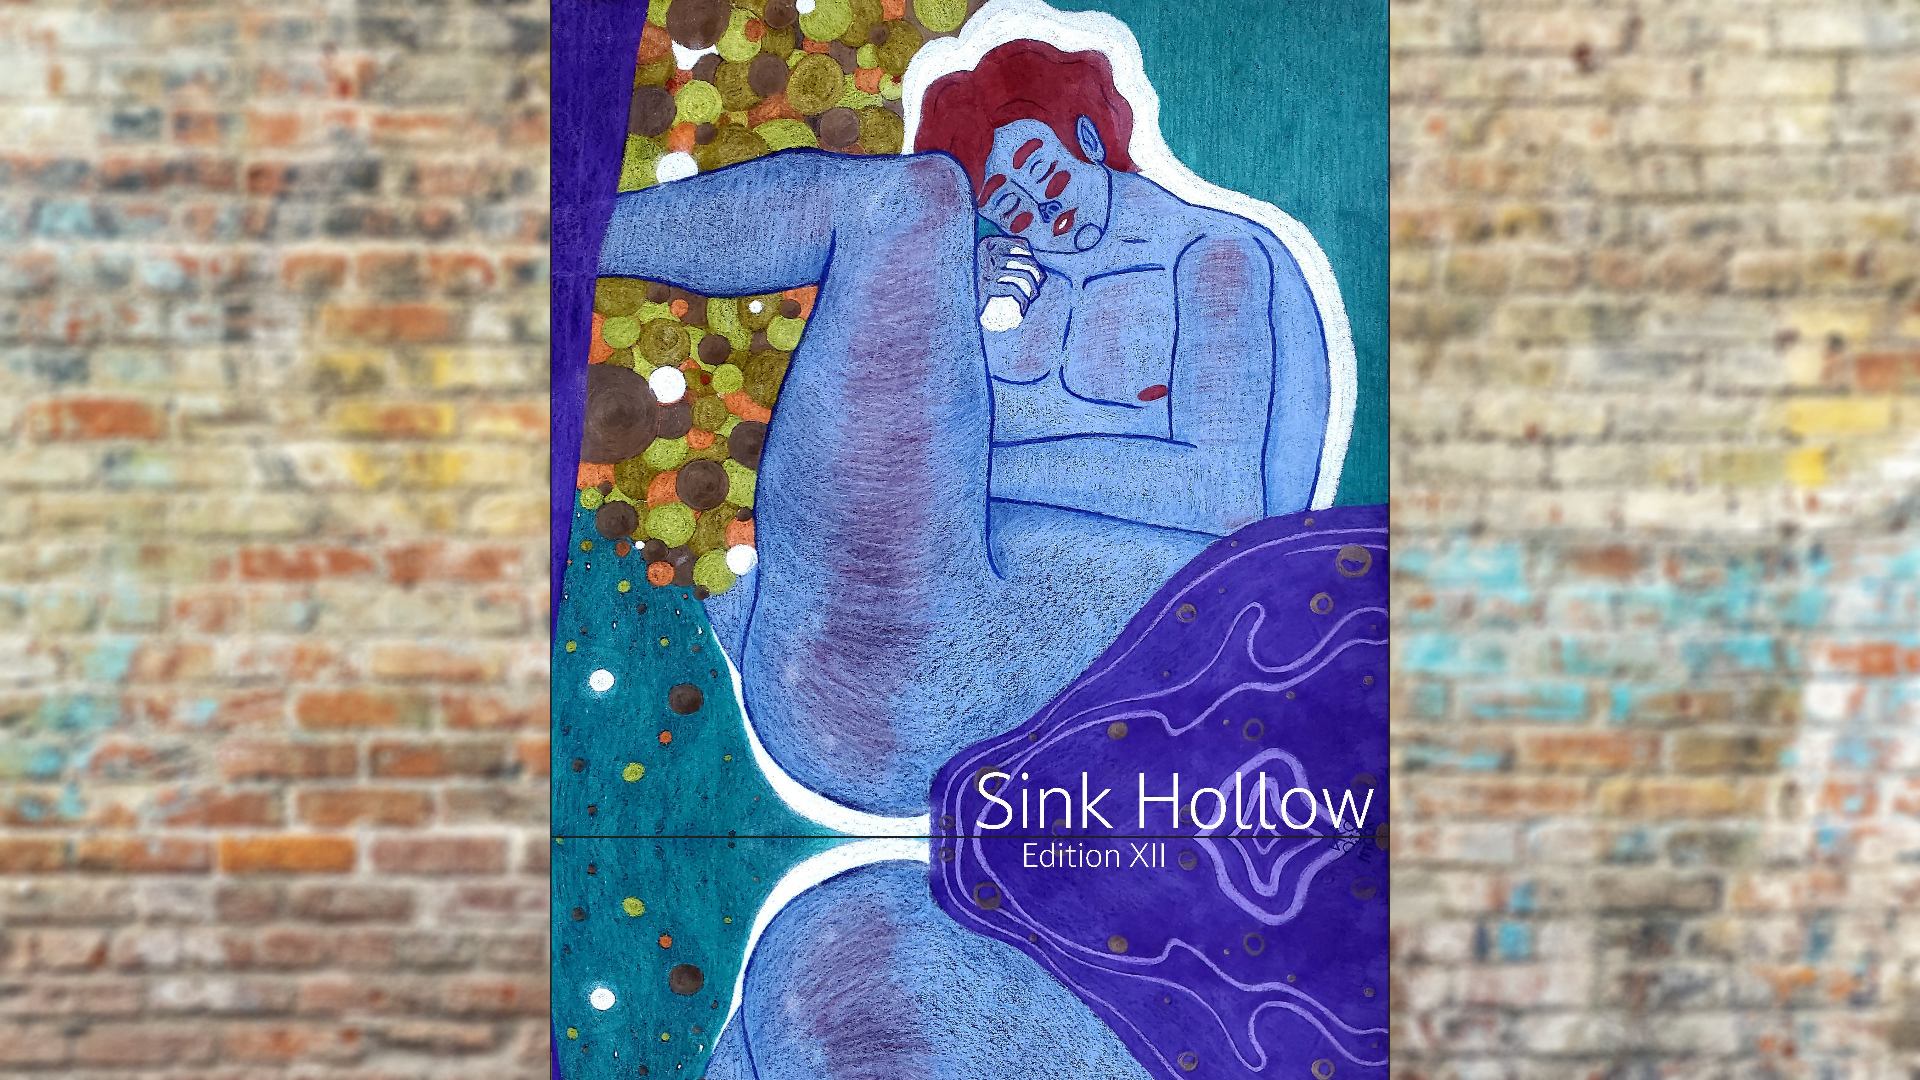 Cover for the 12th issue of Sink Hollow